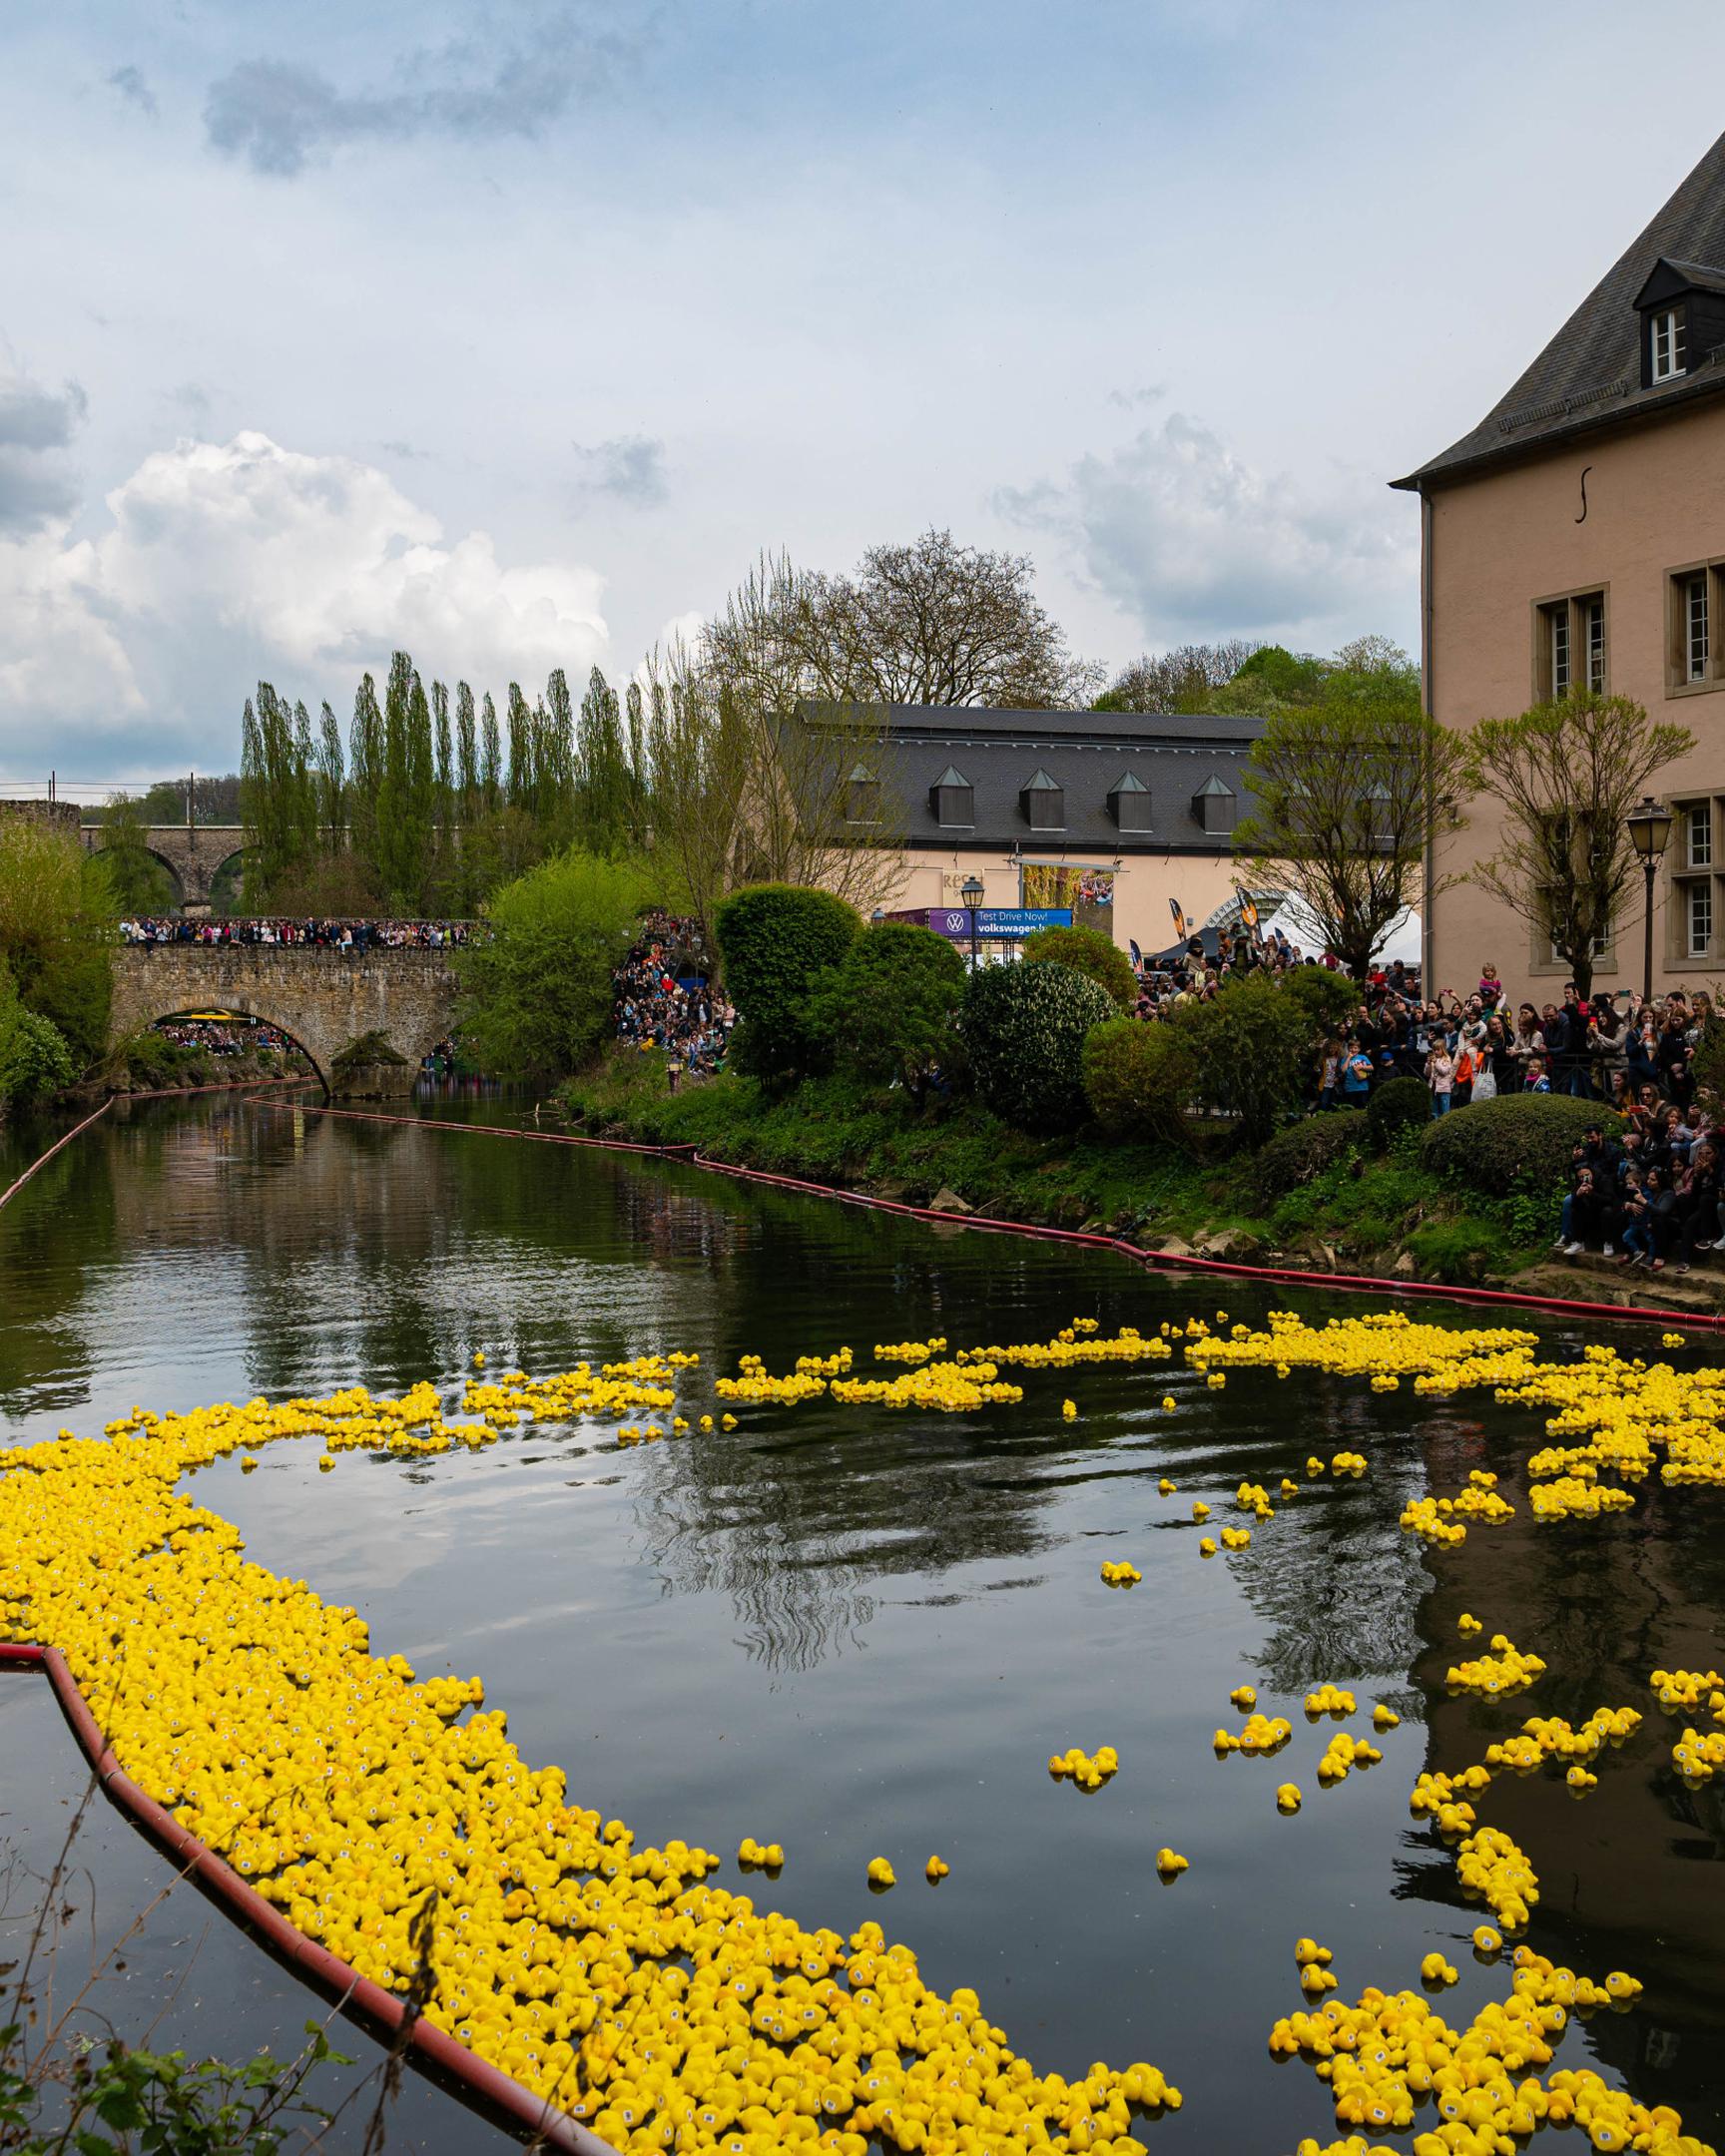 16 000 ducks will float down the River Alzette on Saturday 29 April 